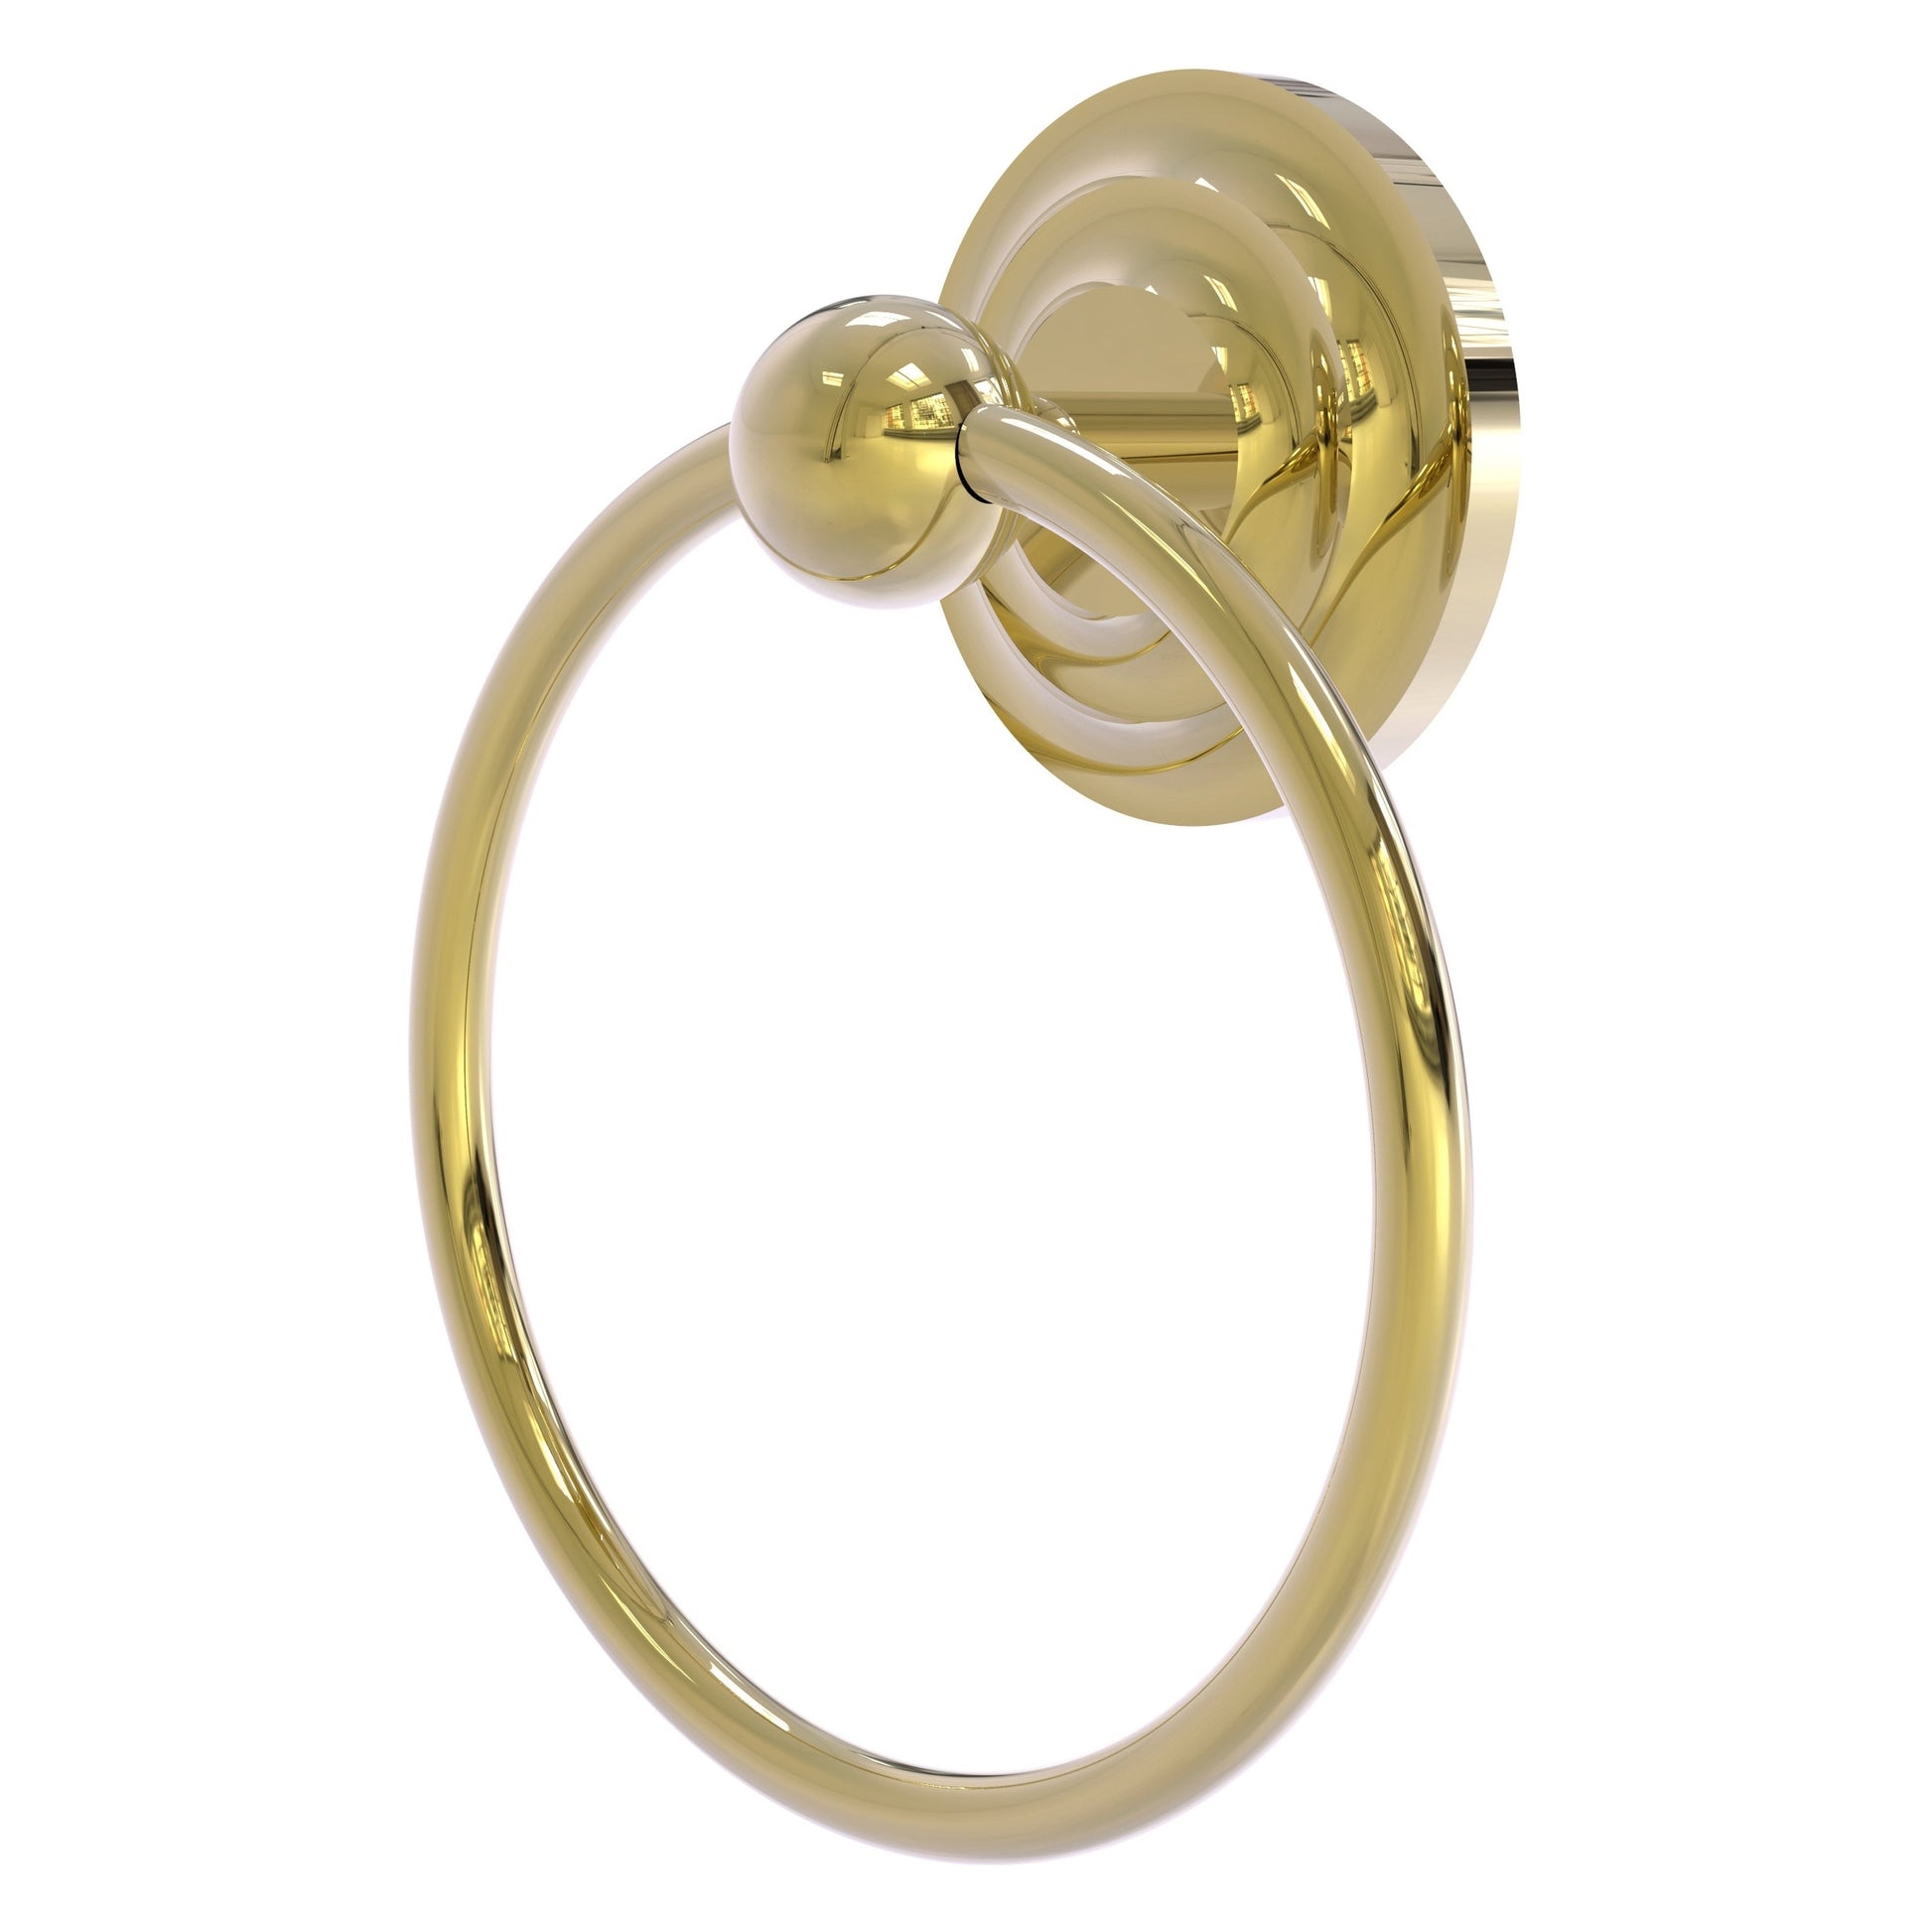 Allied Brass Que New 6" x 6" Unlacquered Brass Solid Brass Towel Ring